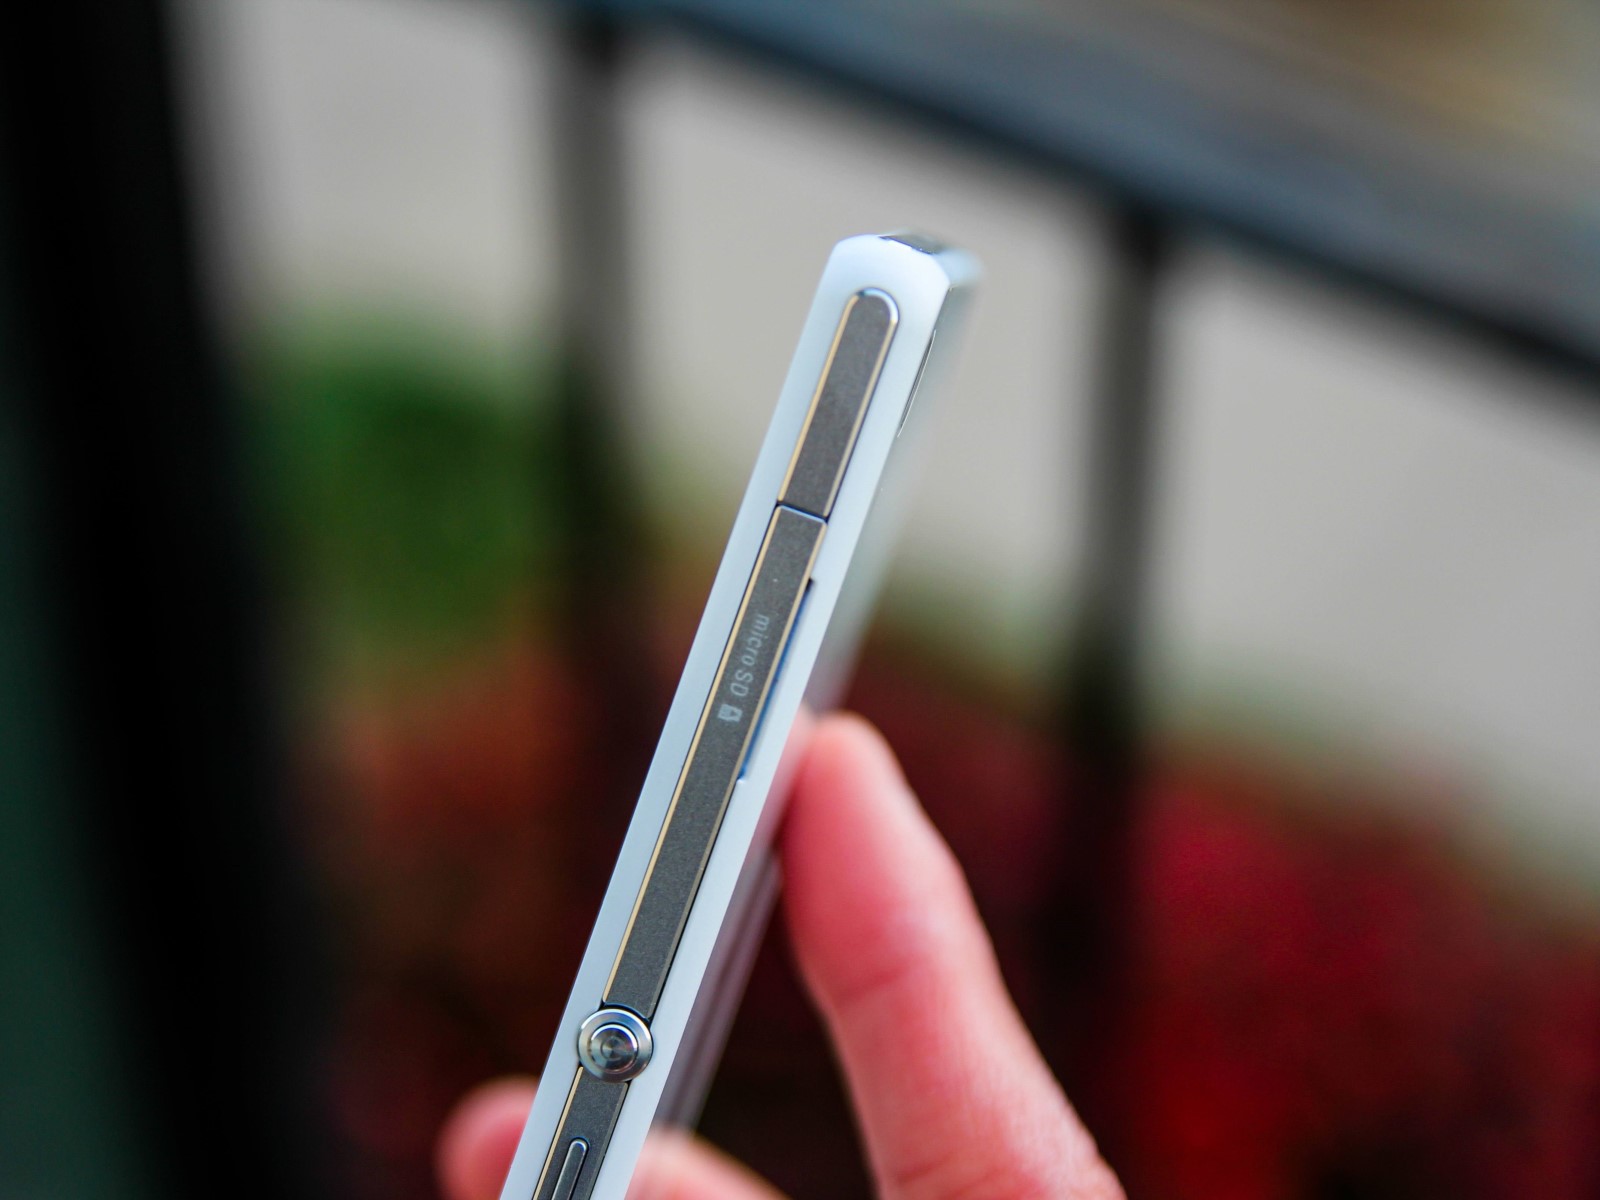 Xperia Z3V Charging Port Cover Replacement: Step-by-Step Guide